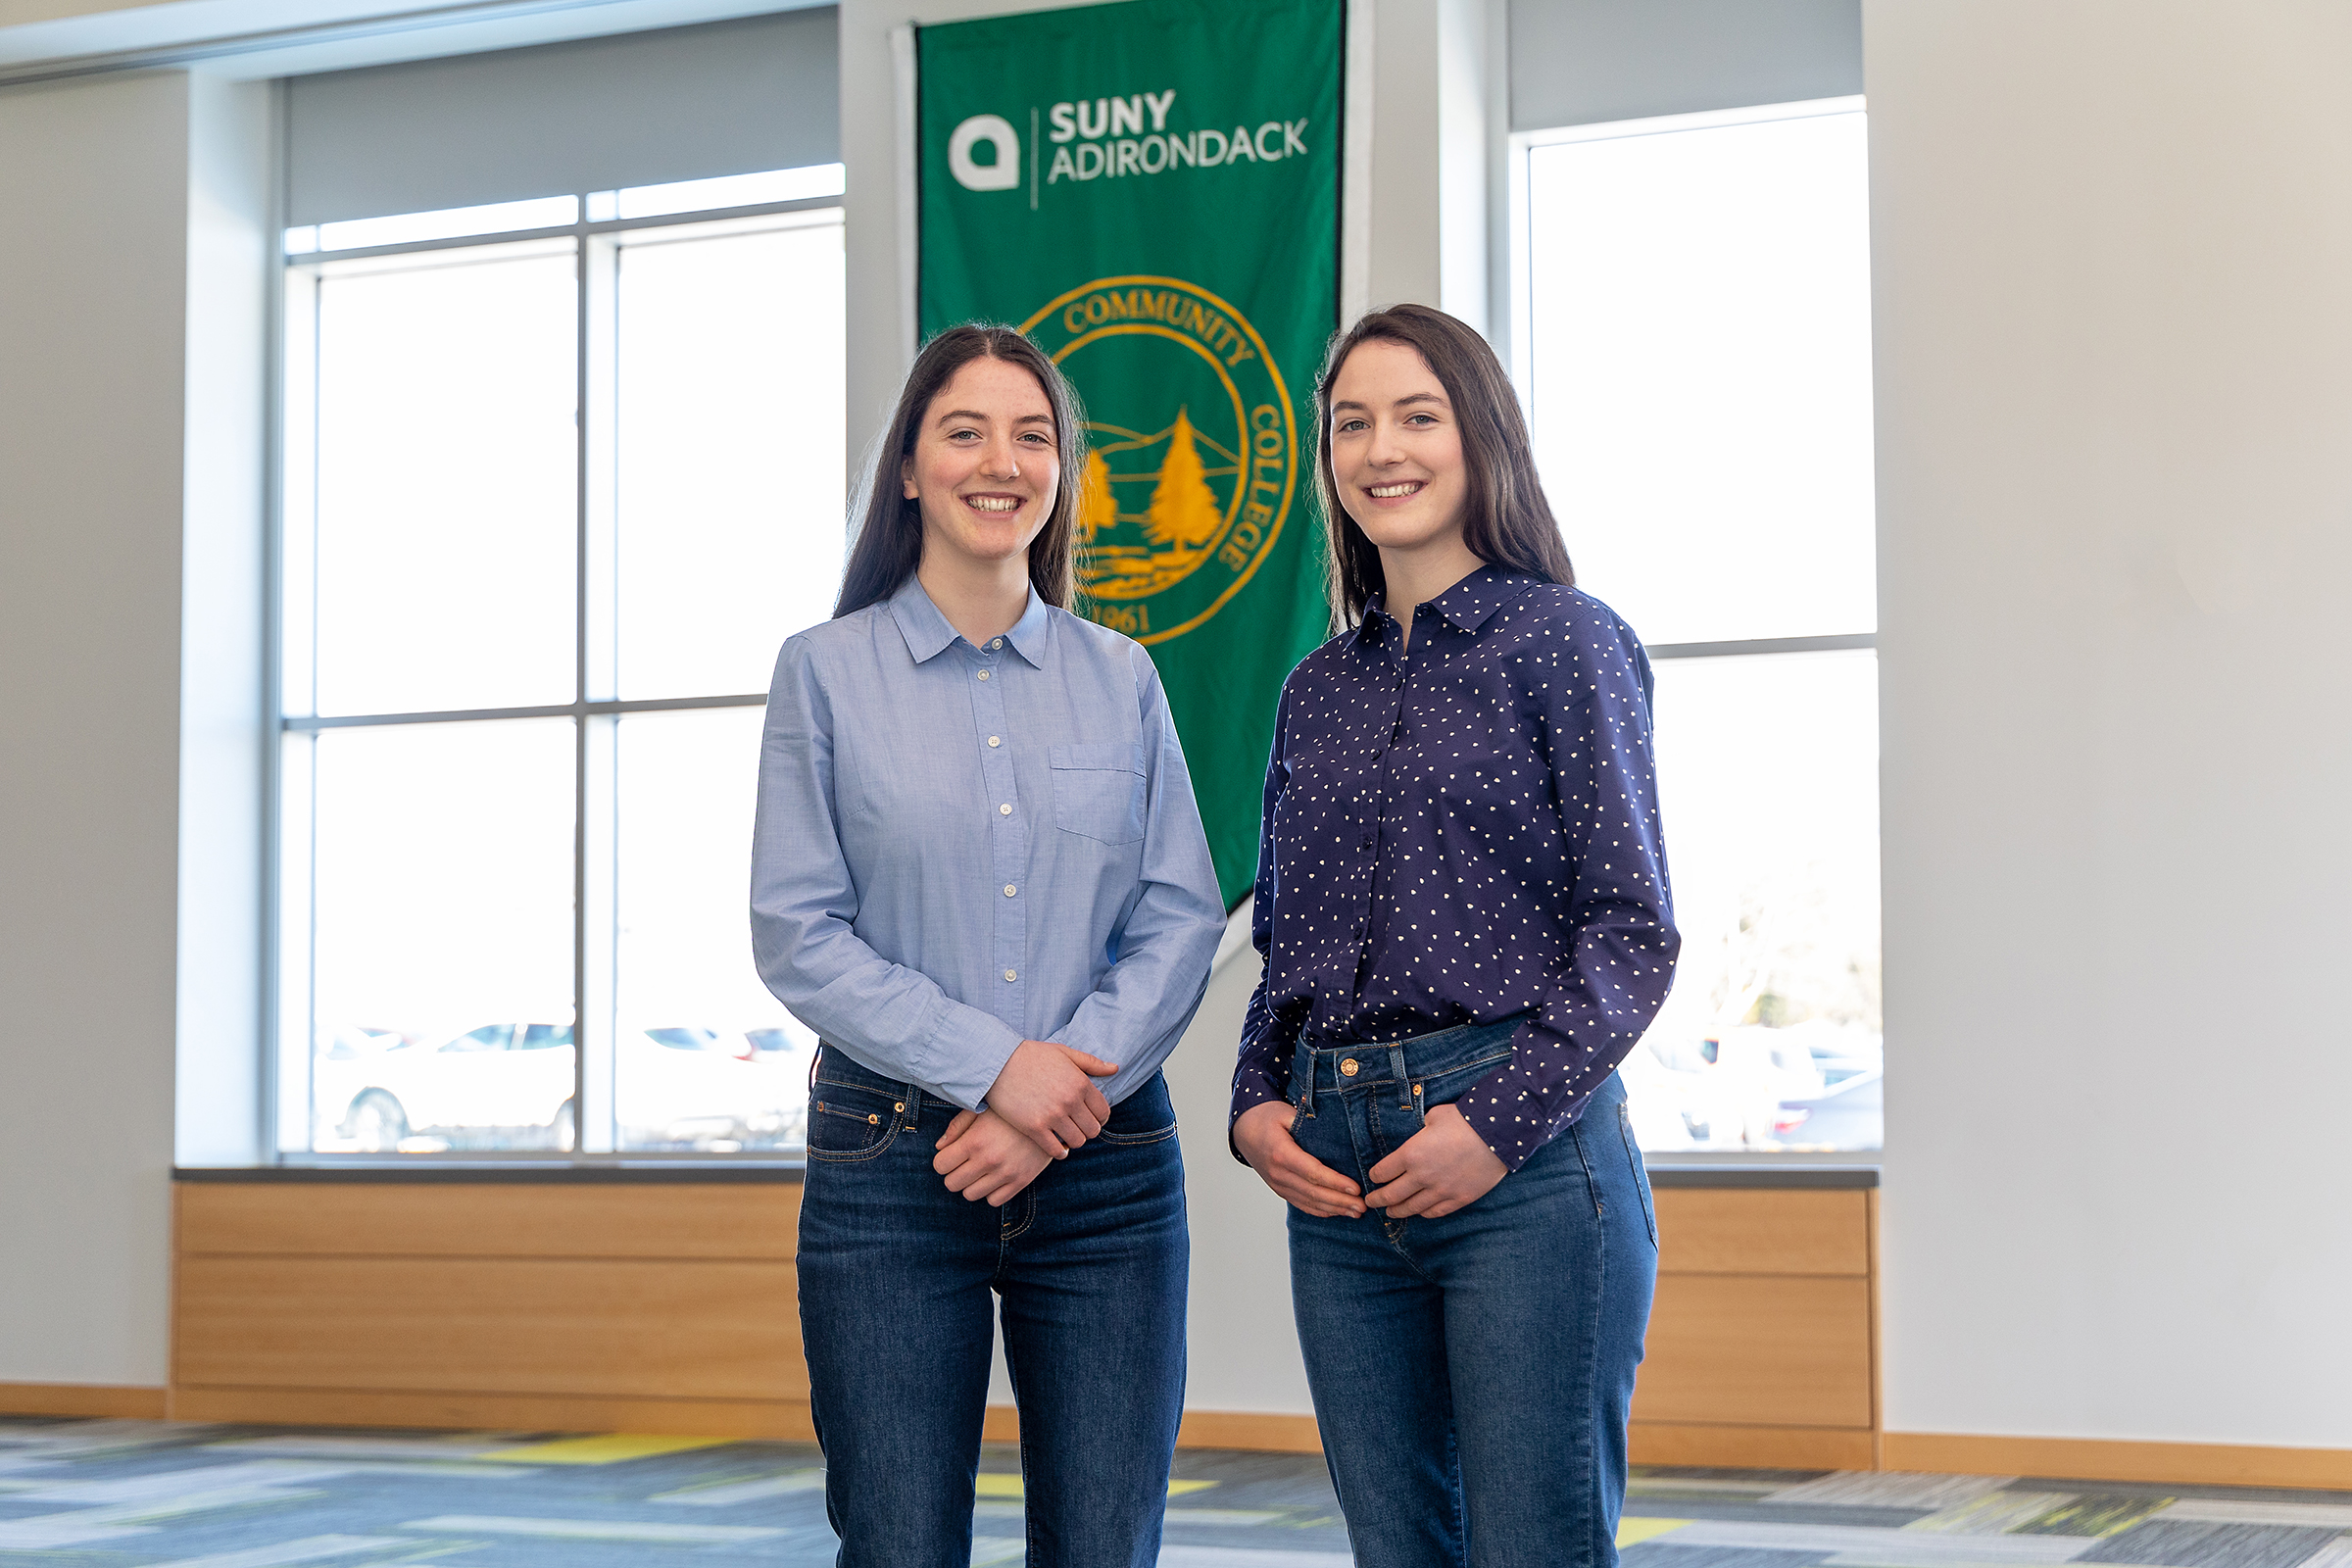 PHOTO CAPTION: Identical twin sisters Kate McKay, left, and Lucy McKay, right, of Cambridge earned SUNY Chancellor's Award for Student Excellence.